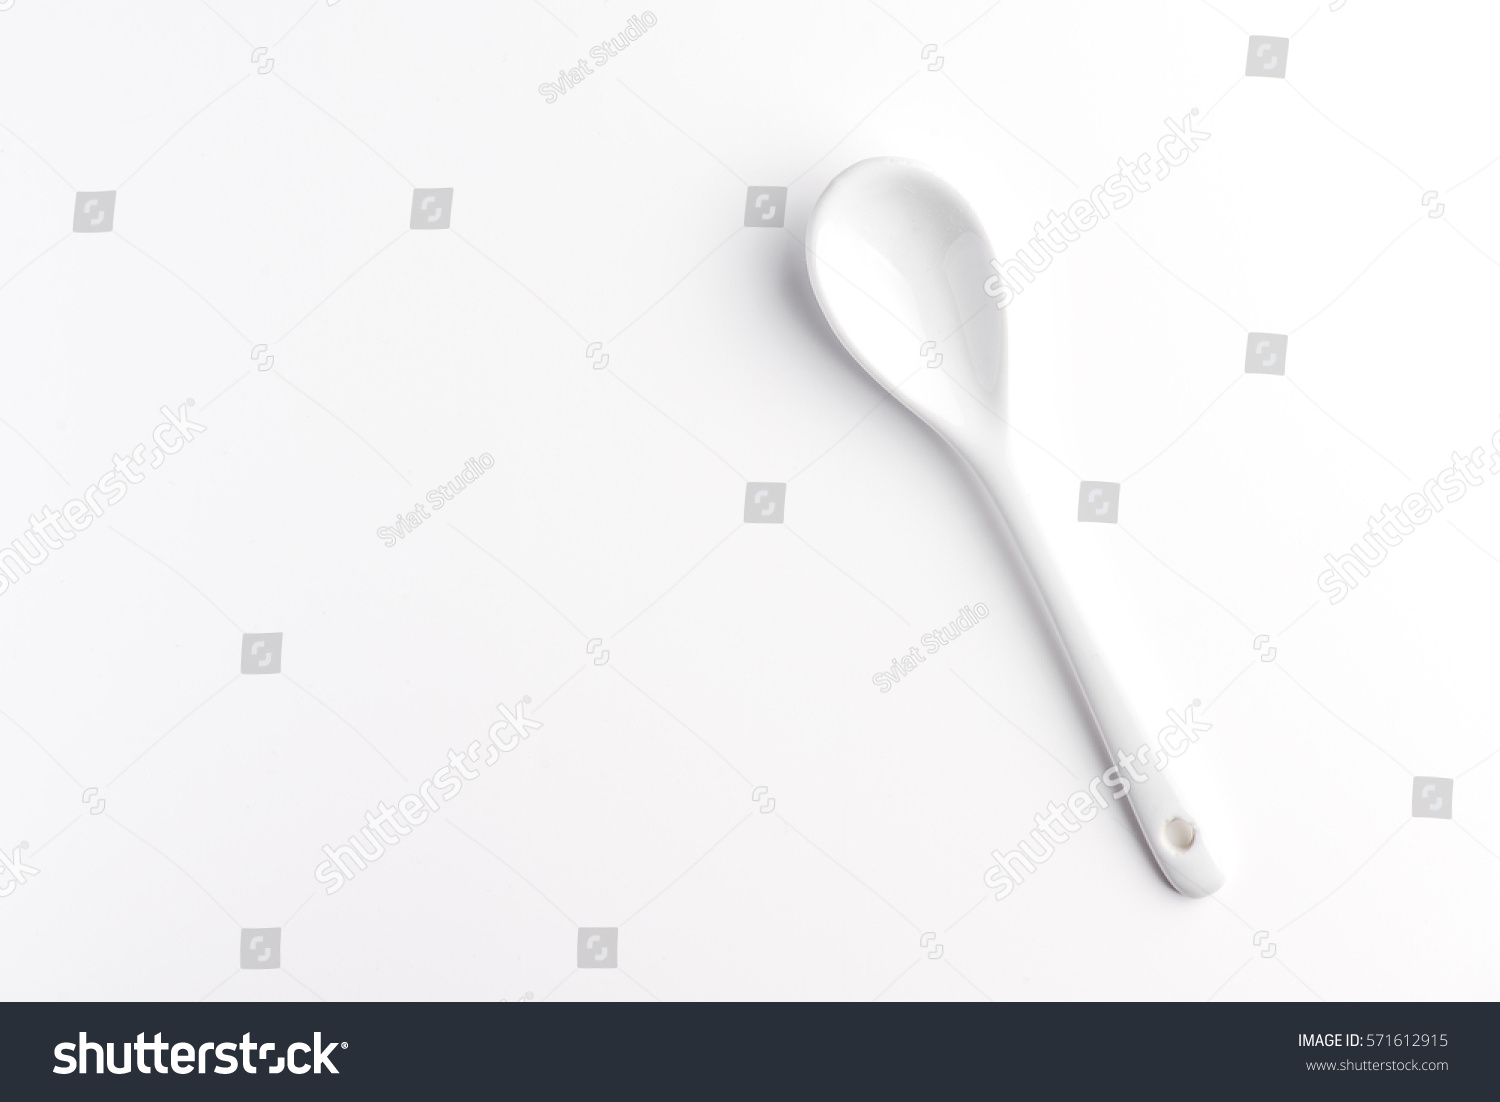 White spoon isolated on a white surface #571612915